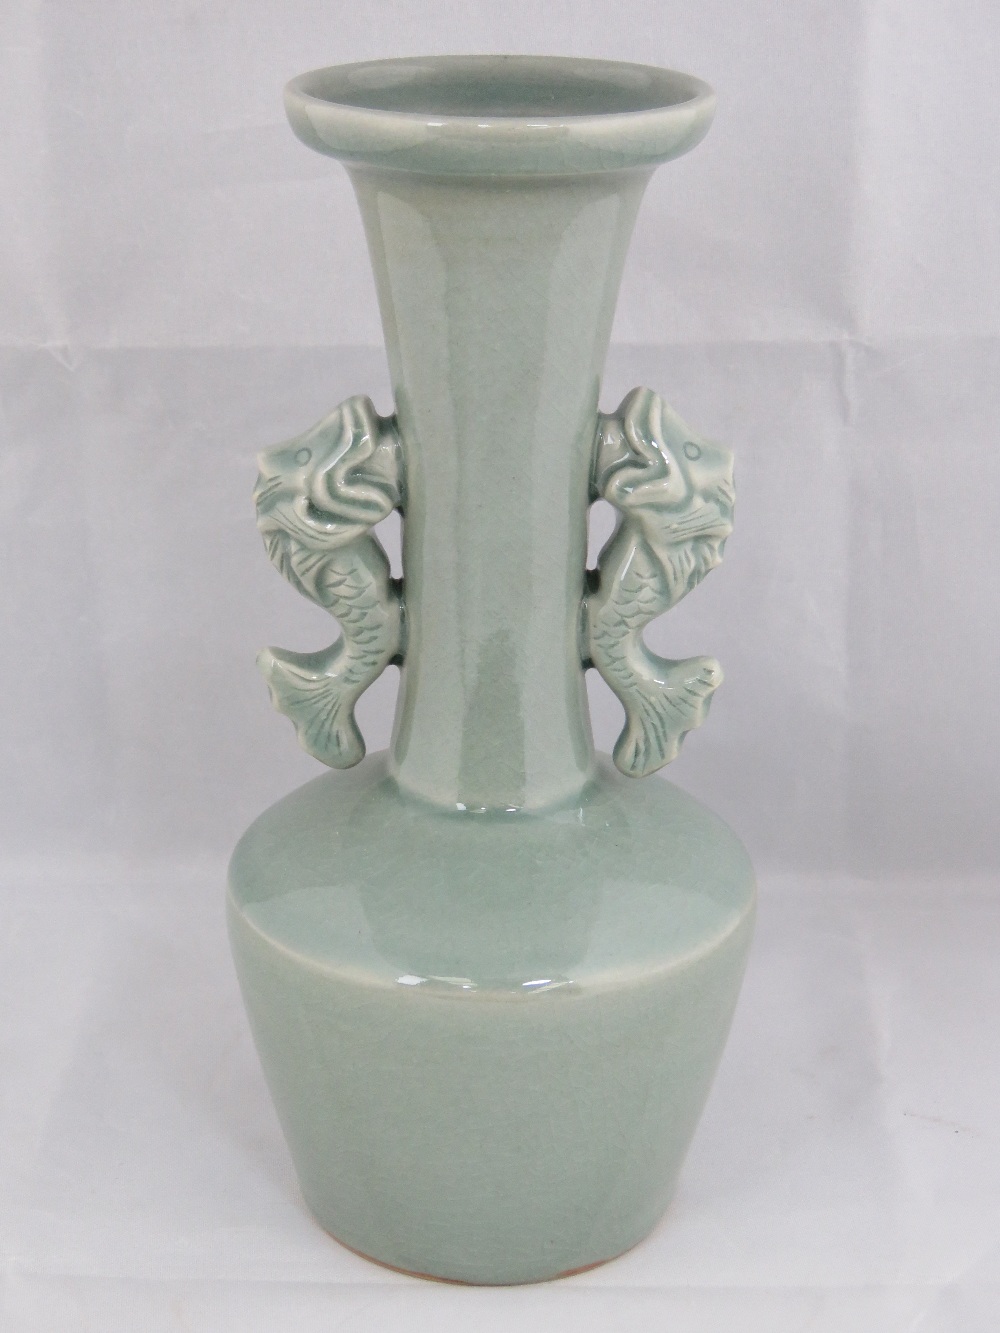 A reproduction celadon glaze vase with twin fish handles, 24cm high.